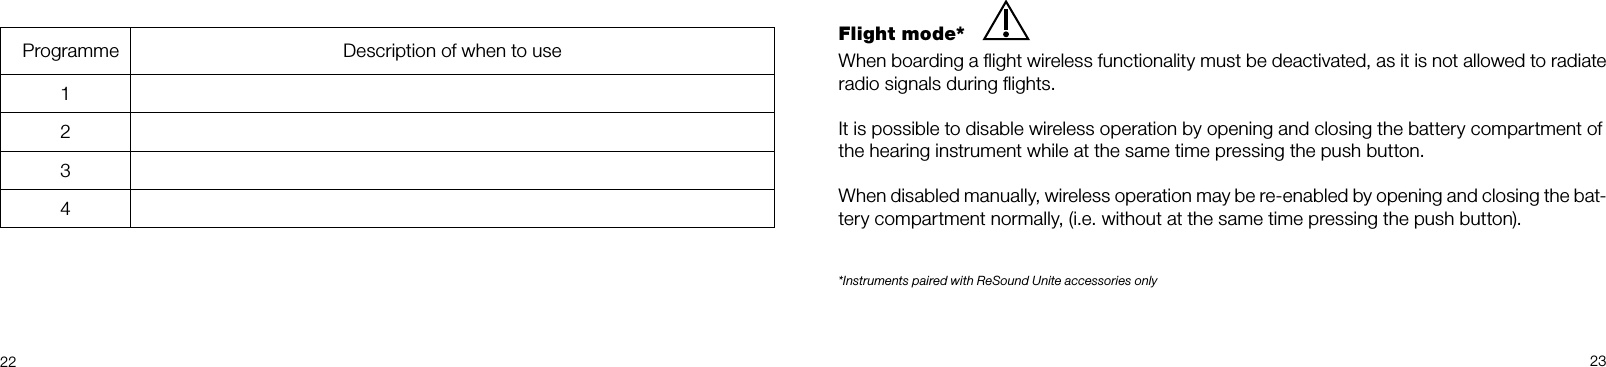  2223Flight mode*When boarding a ﬂight wireless functionality must be deactivated, as it is not allowed to radiate radio signals during ﬂights.It is possible to disable wireless operation by opening and closing the battery compartment ofthe hearing instrument while at the same time pressing the push button.When disabled manually, wireless operation may be re-enabled by opening and closing the bat-tery compartment normally, (i.e. without at the same time pressing the push button).*Instruments paired with ReSound Unite accessories only  Programme Description of when to use1234